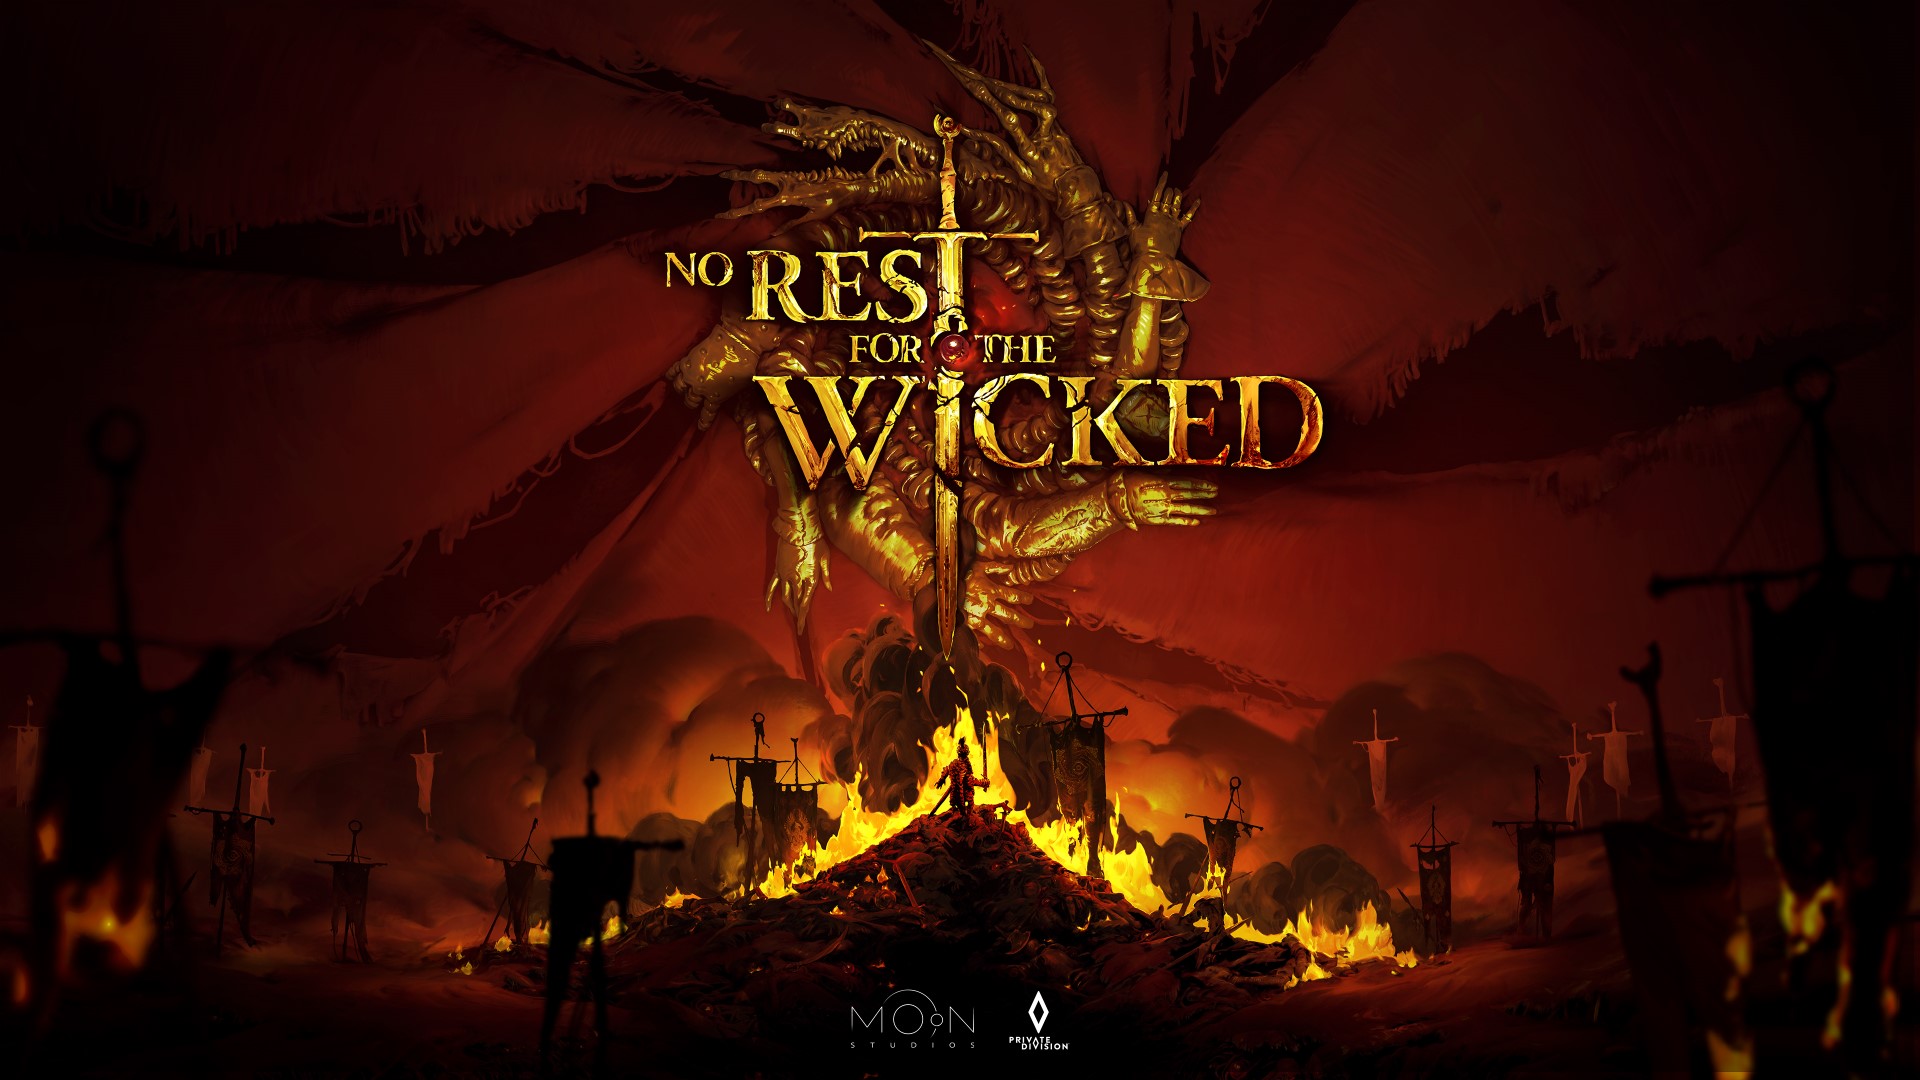 No Rest for the Wicked Enters Steam Early Access on April 18th